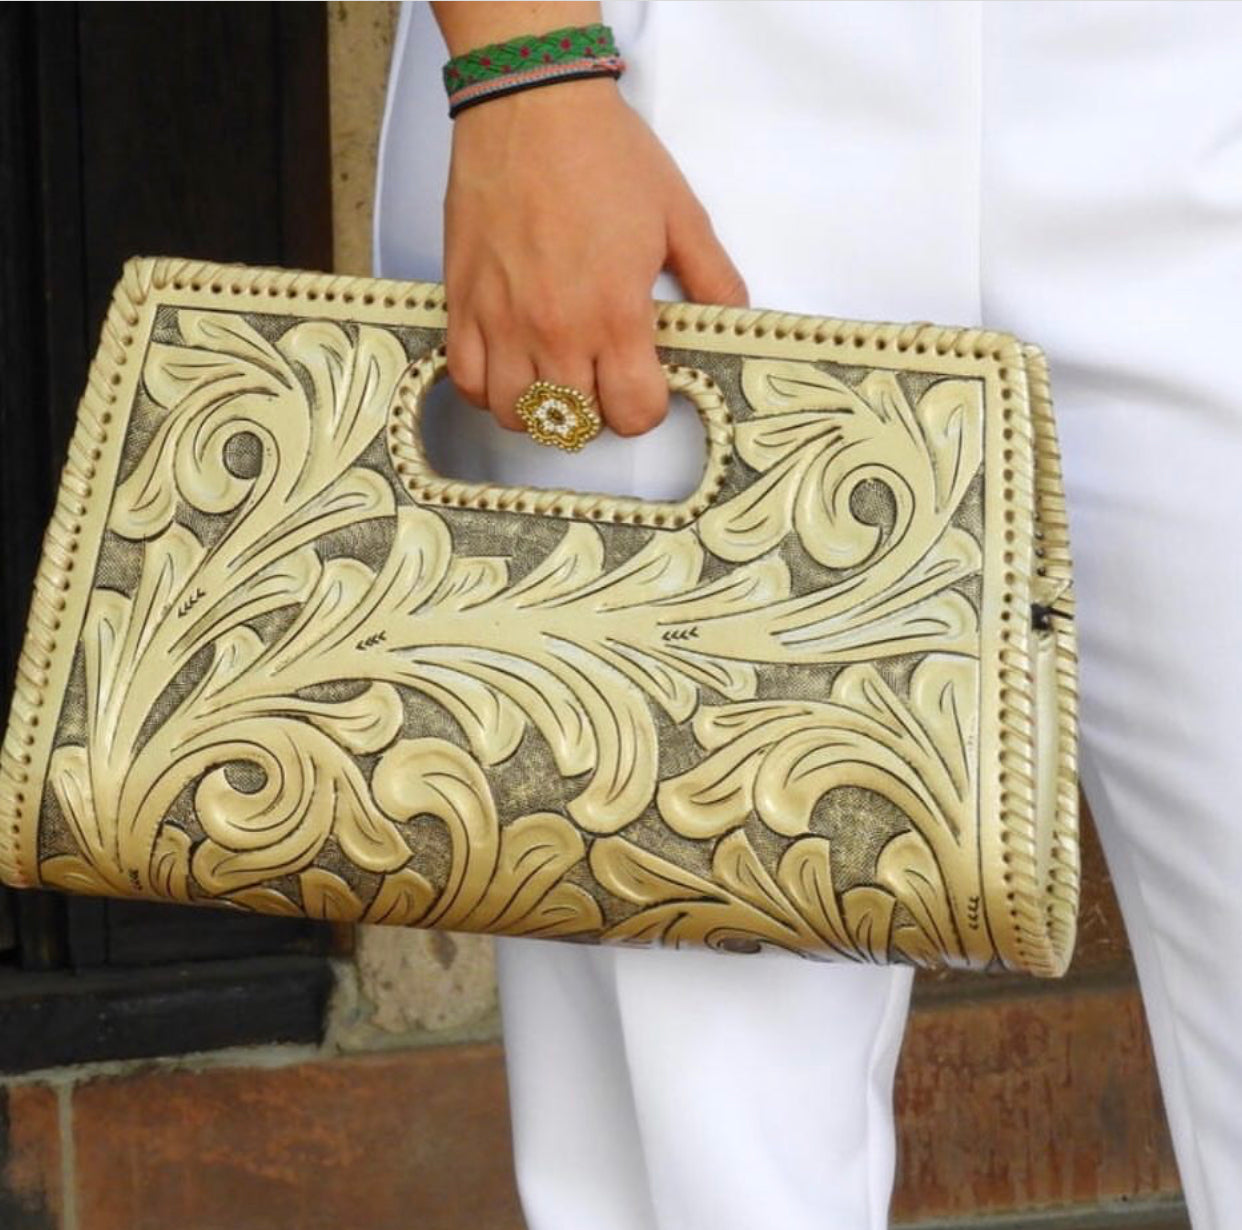 Hand-Tooled Leather Large Clutch Bag "Envelope" by ALLE more Colors - ALLE Handbags